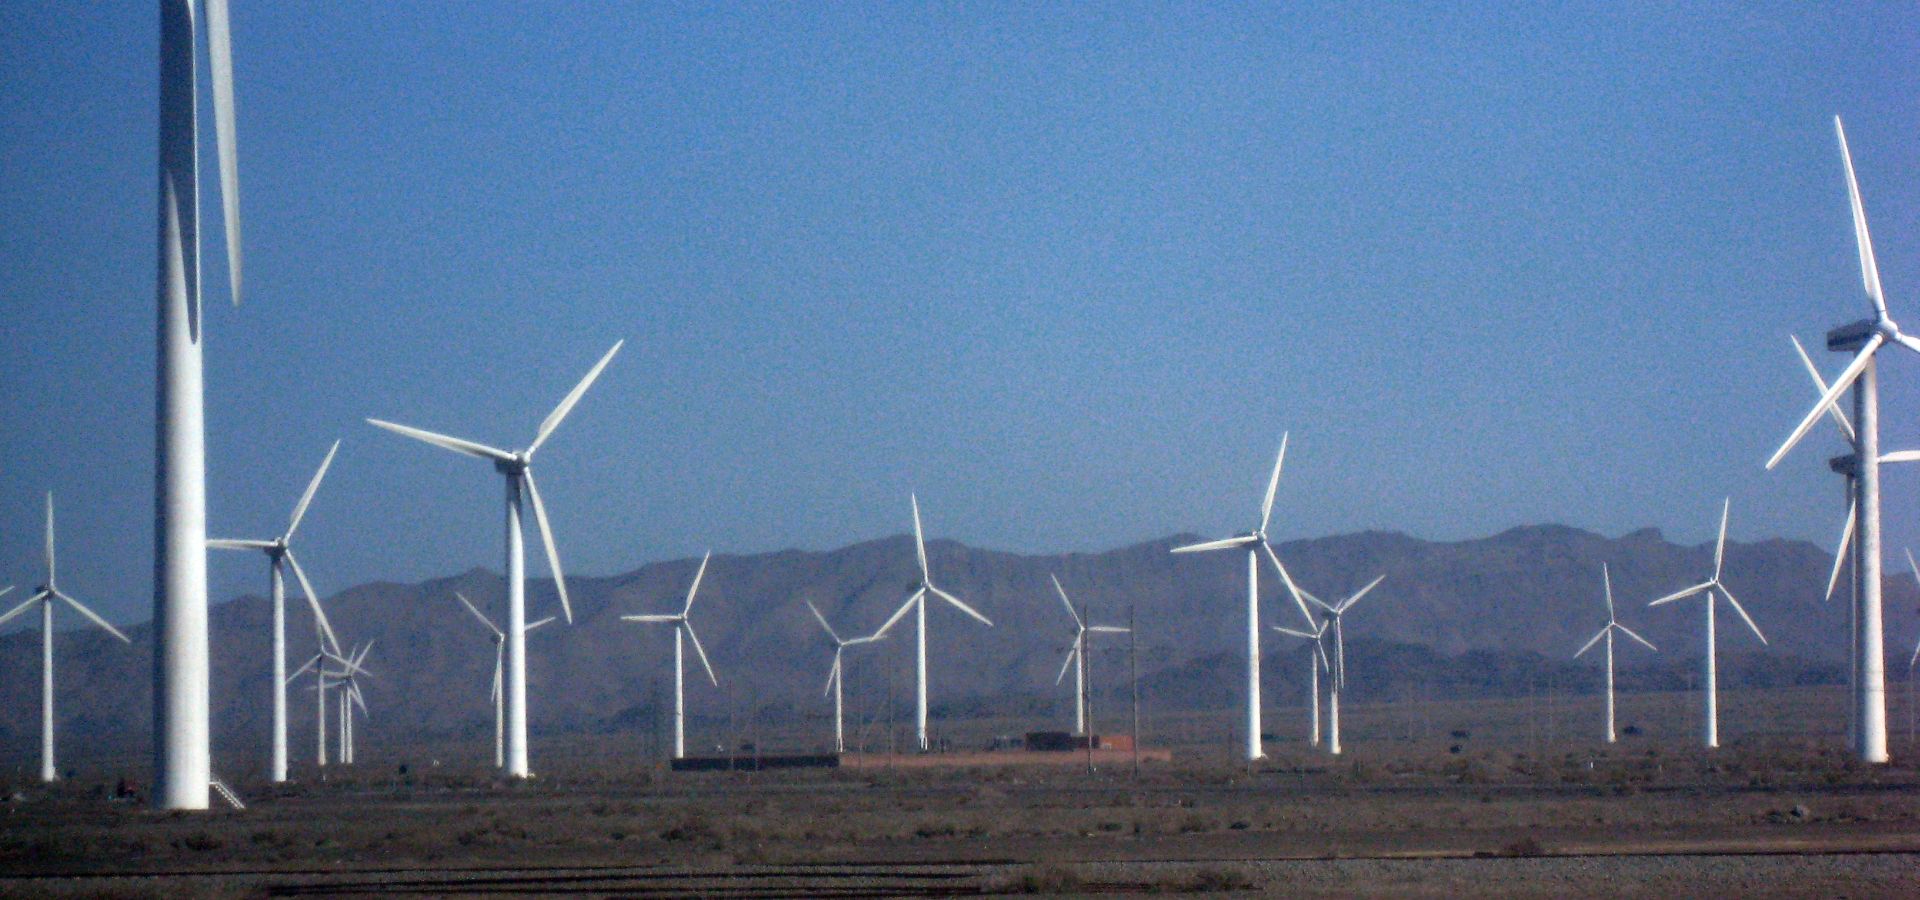 Wind farm in Xinjiang, China, on a sunny day.